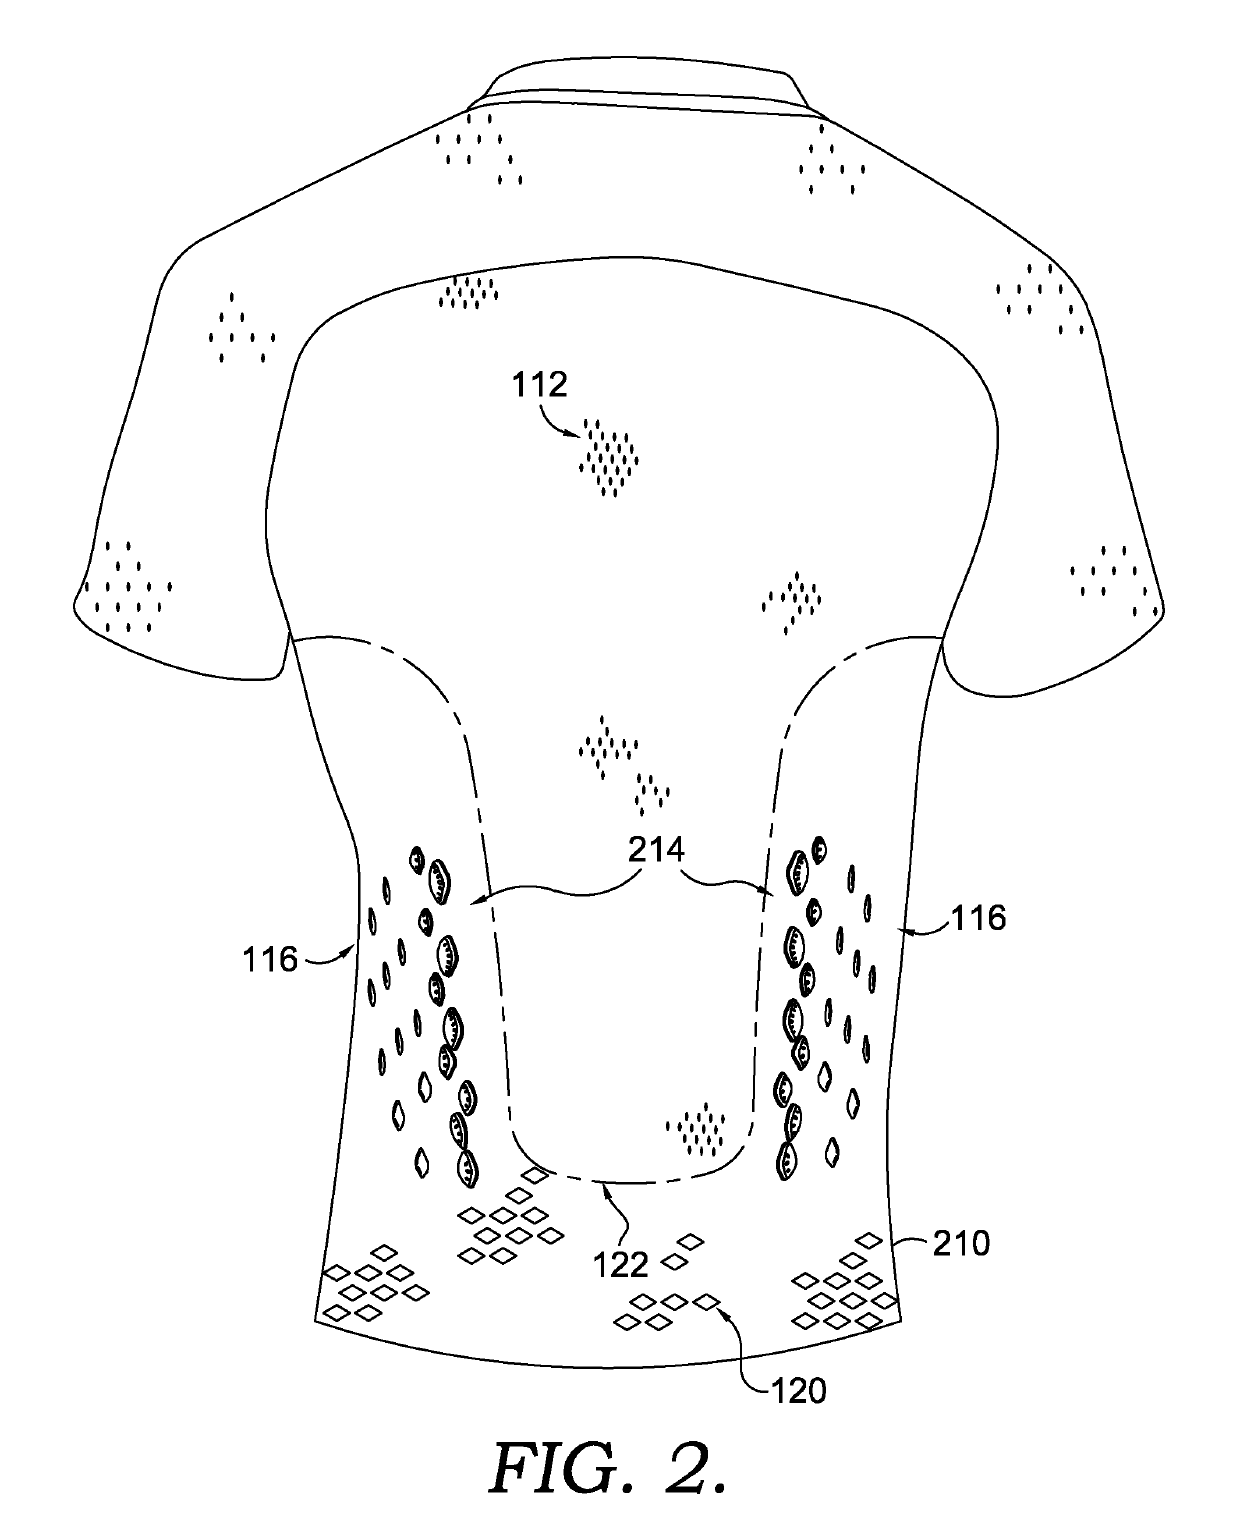 Apparel item configured for reduced cling perception